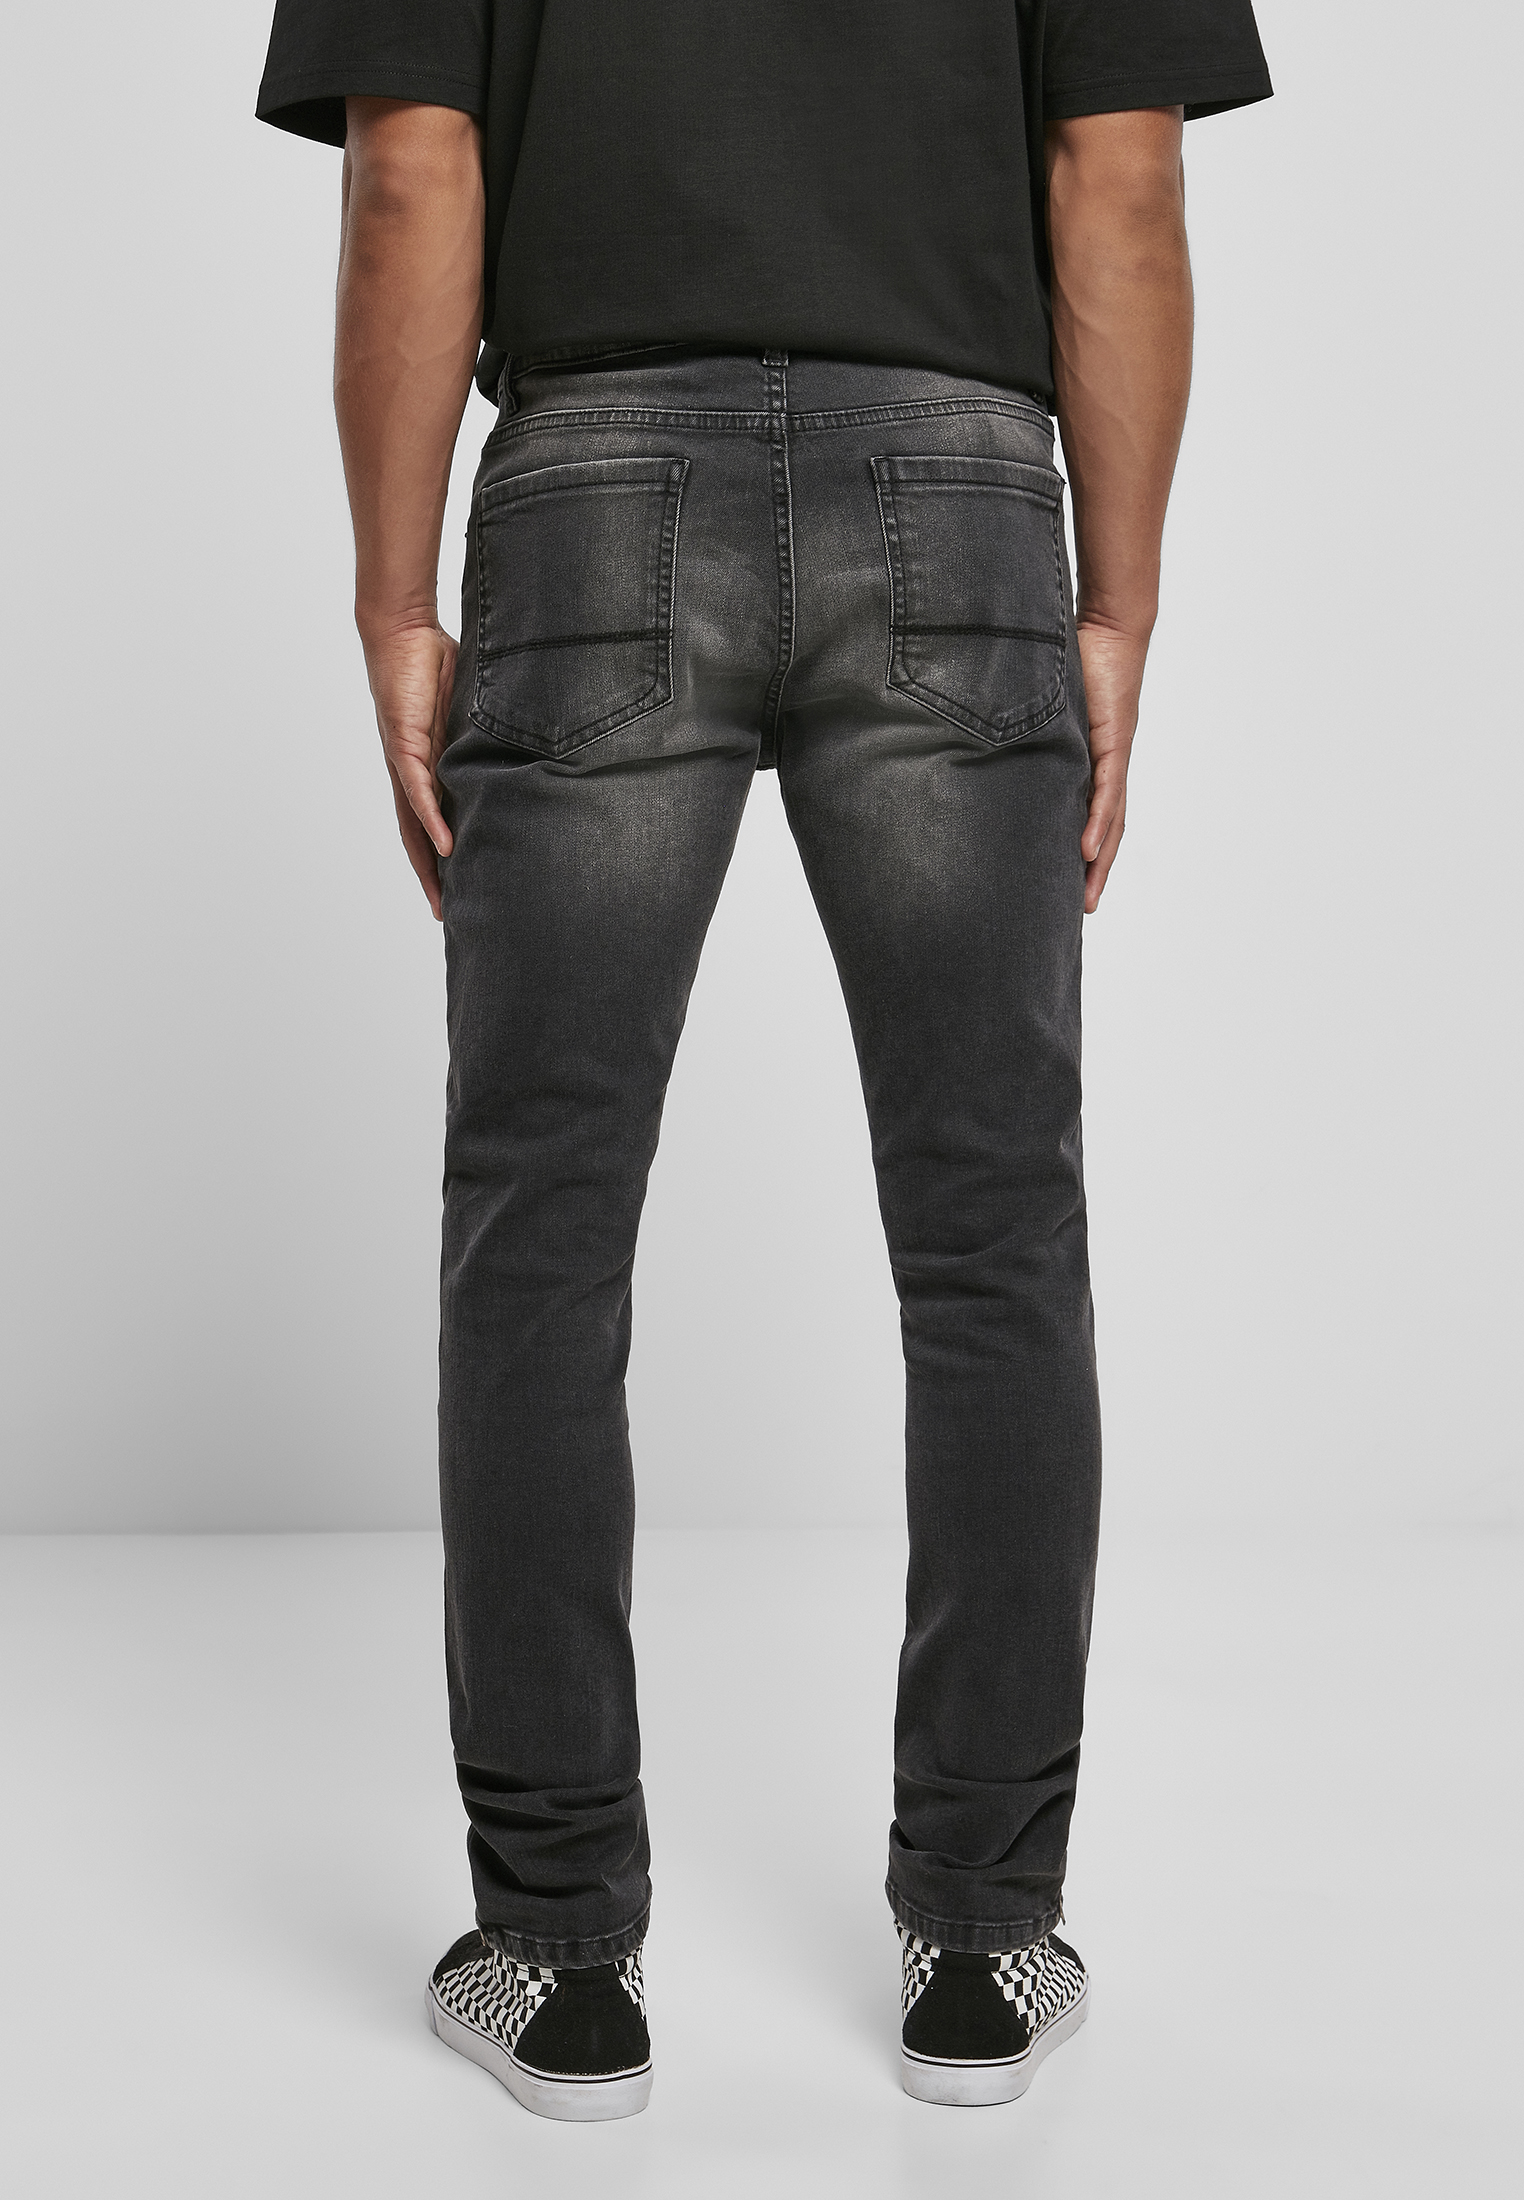 Hosen Slim Fit Zip Jeans in Farbe real black washed